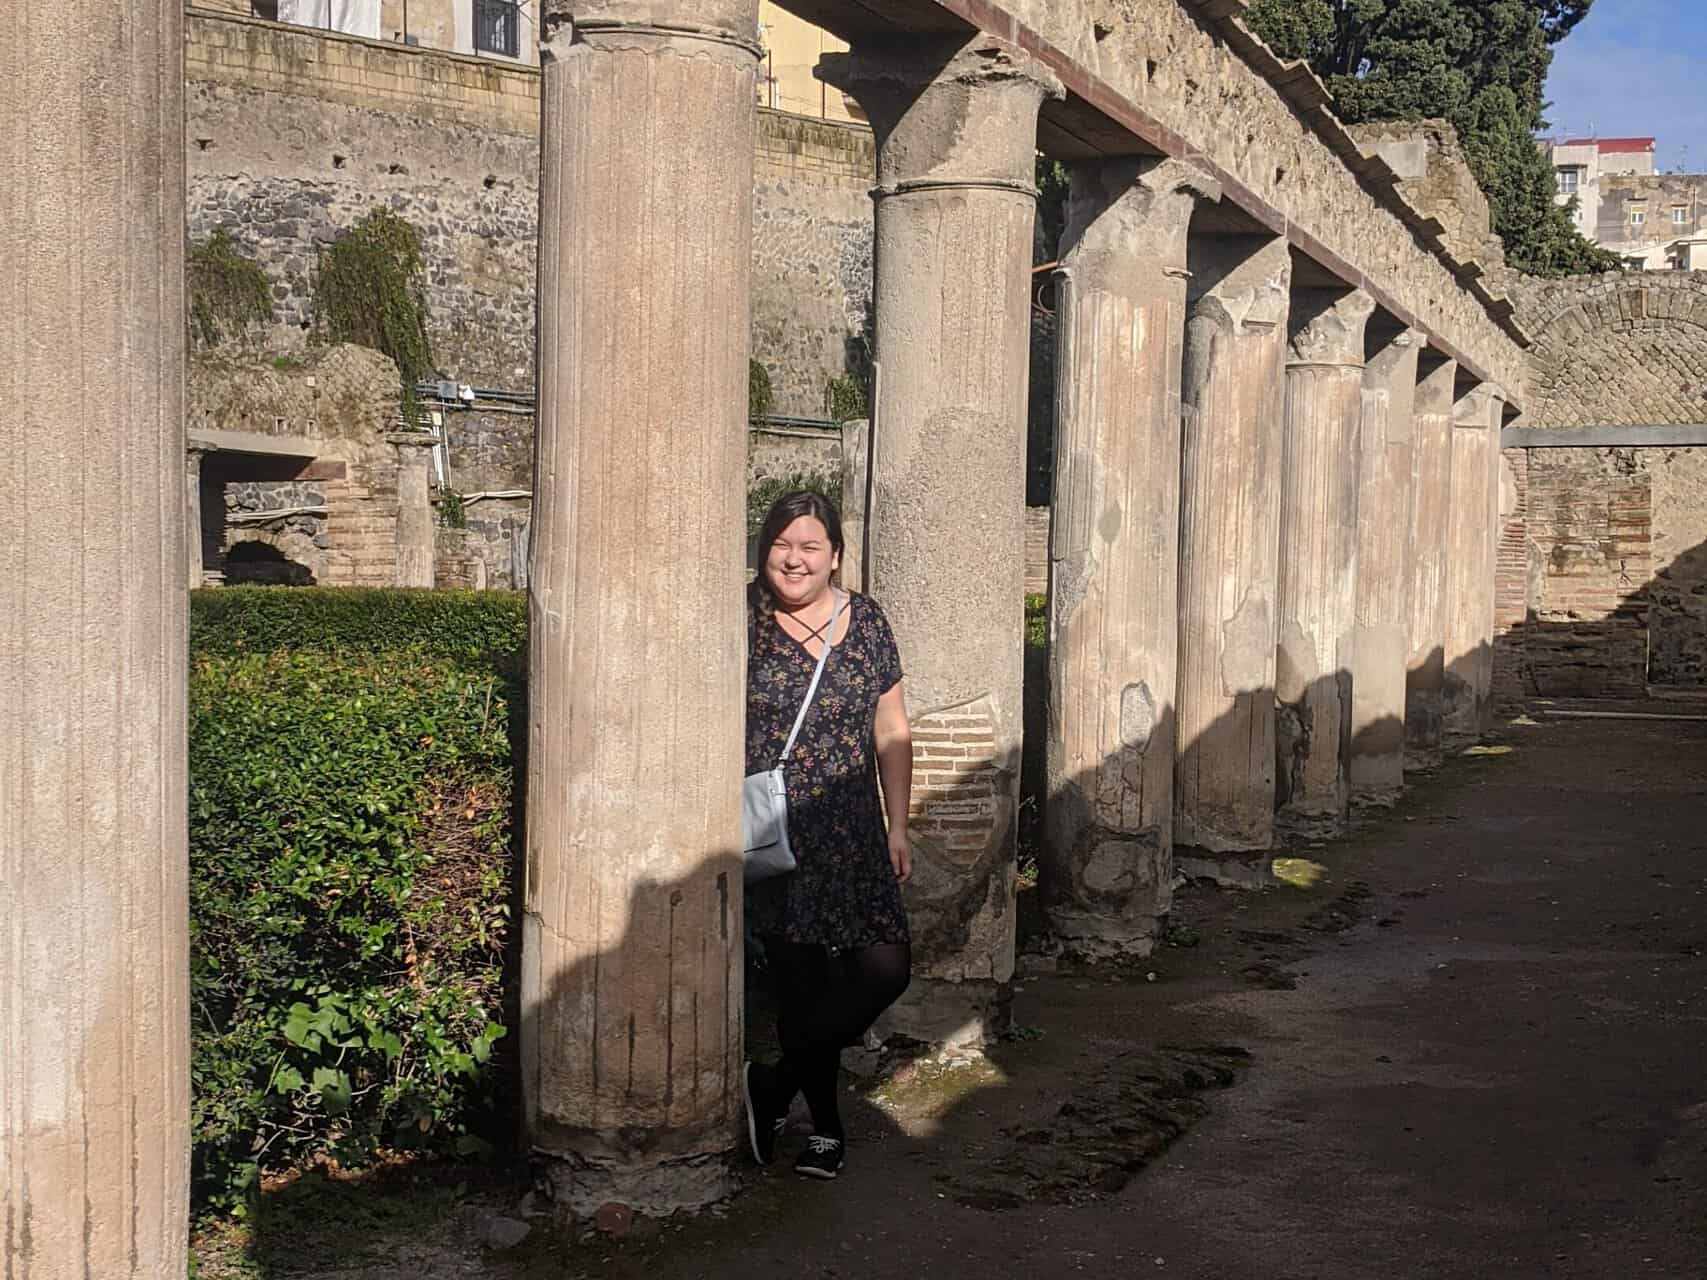 Riana from Teaspoon of Adventure at the ruins of Herculaneum in Italy